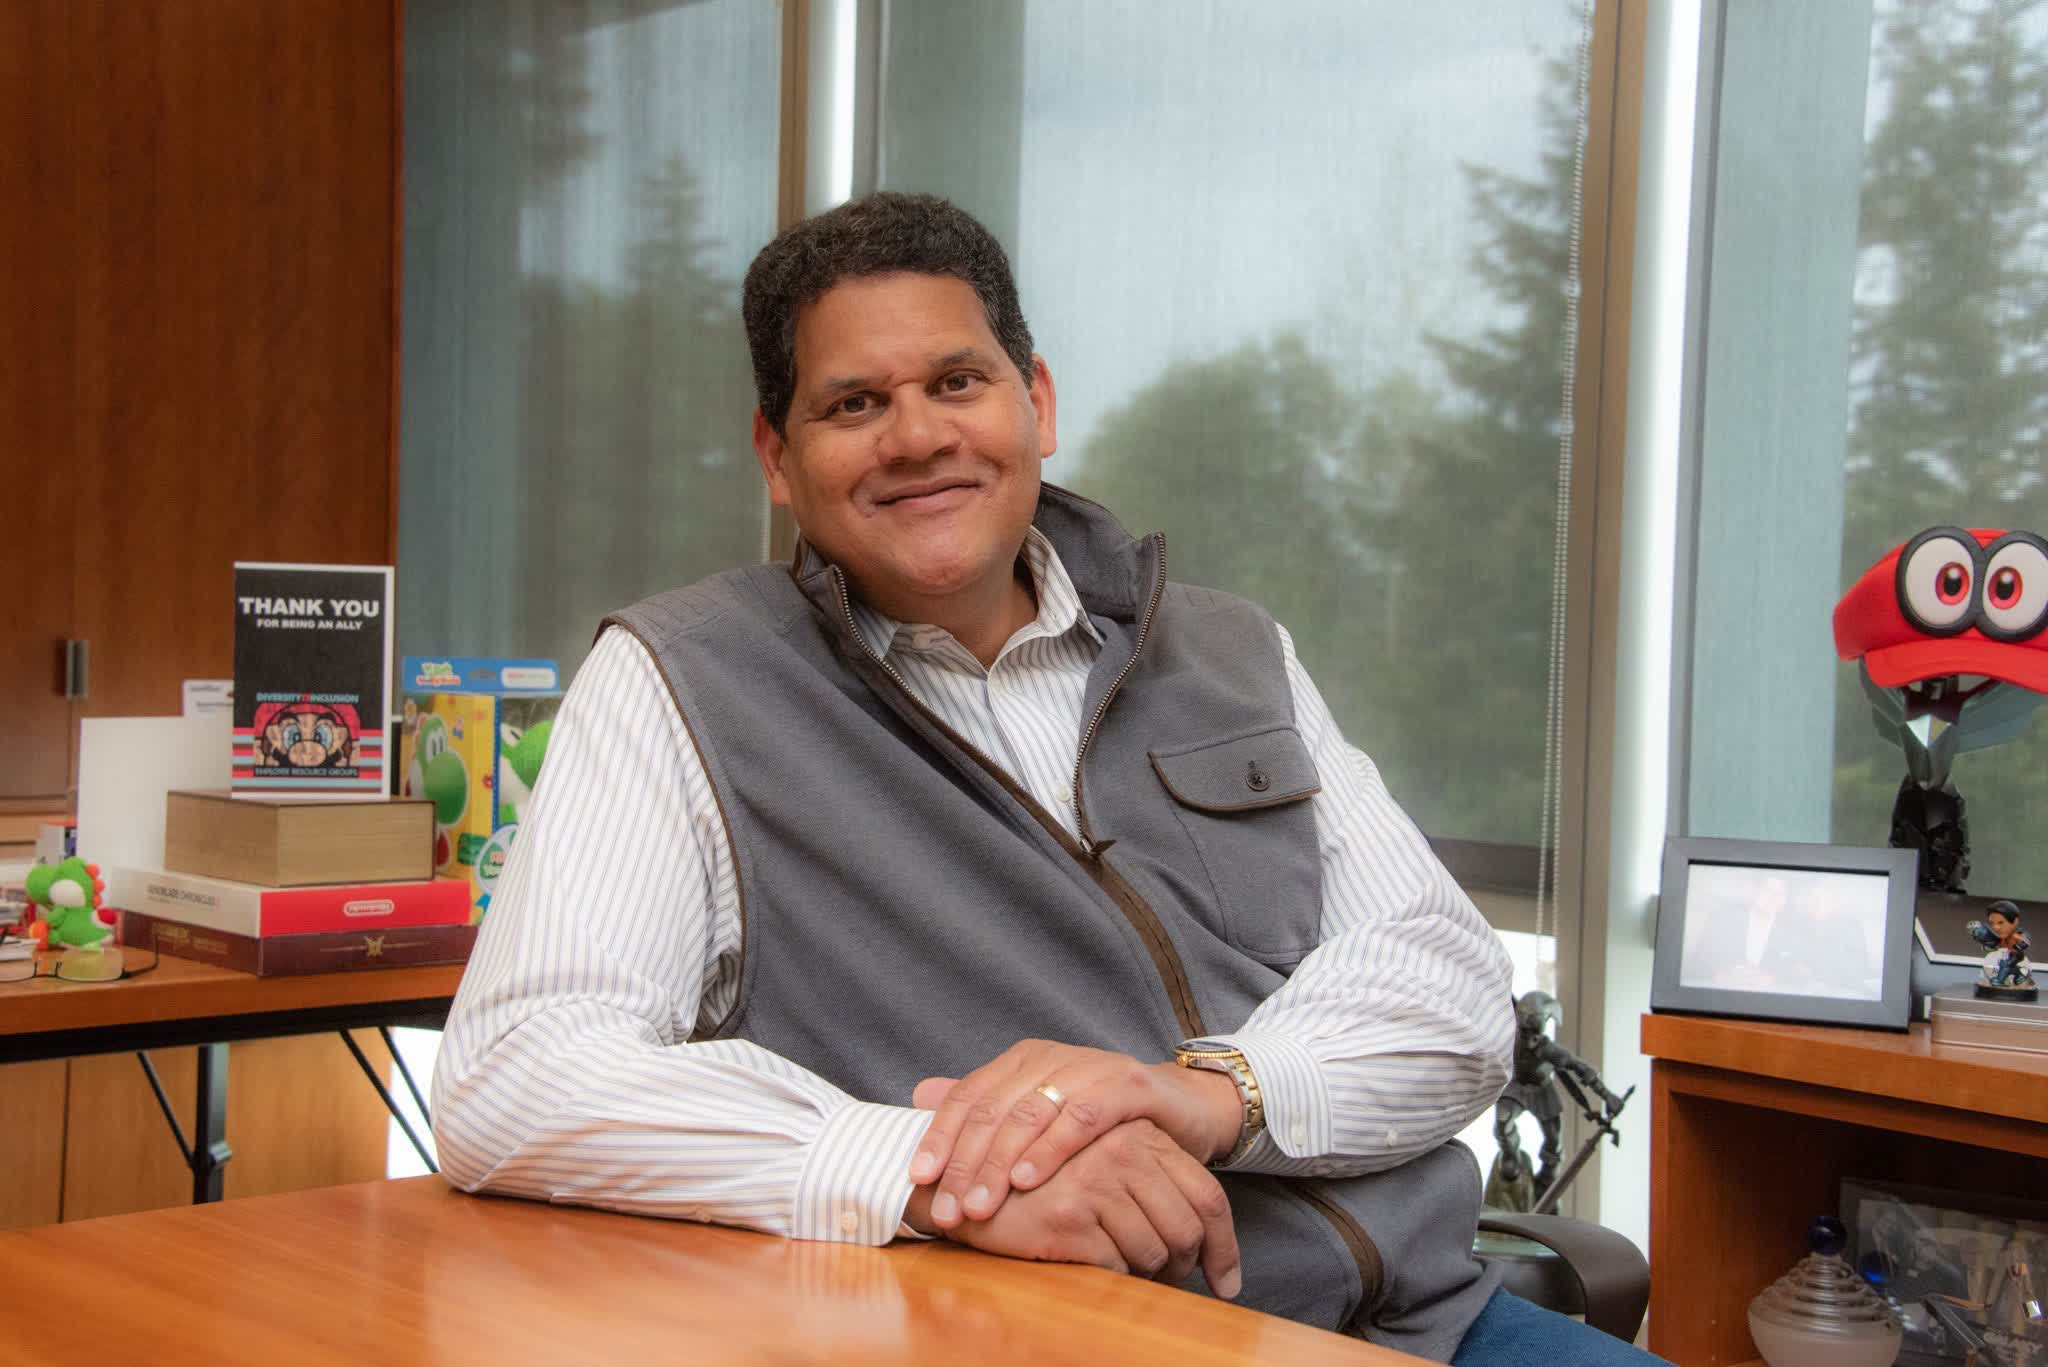 Reggie Fils-Aimé thinks Facebook's vision for the metaverse will not succeed